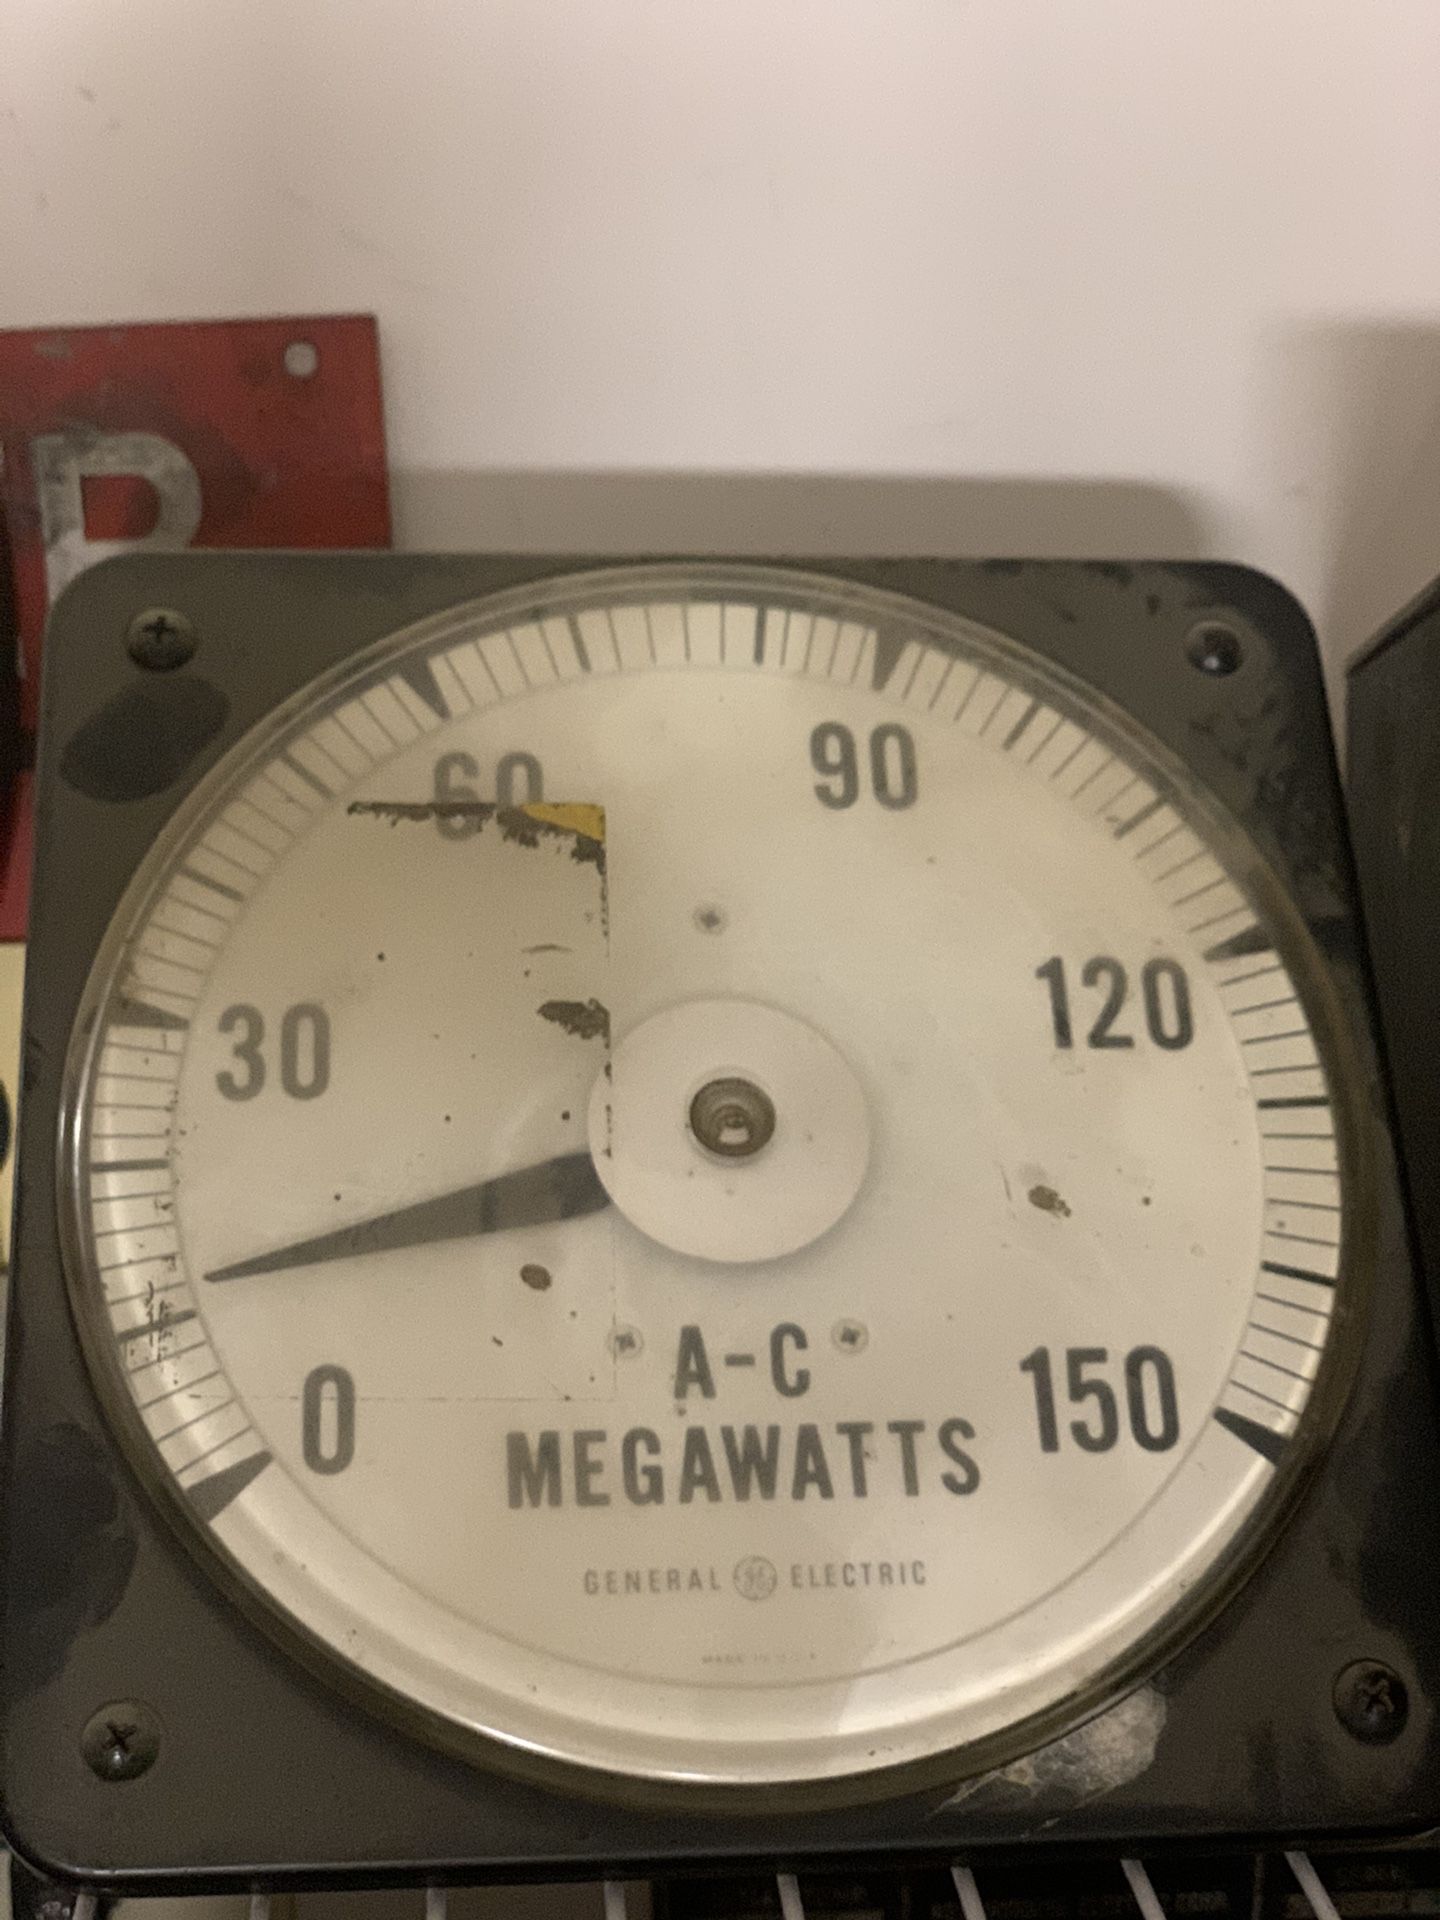 Old General Electric meter that measures in AC MEGAWATTS which is extremely rare